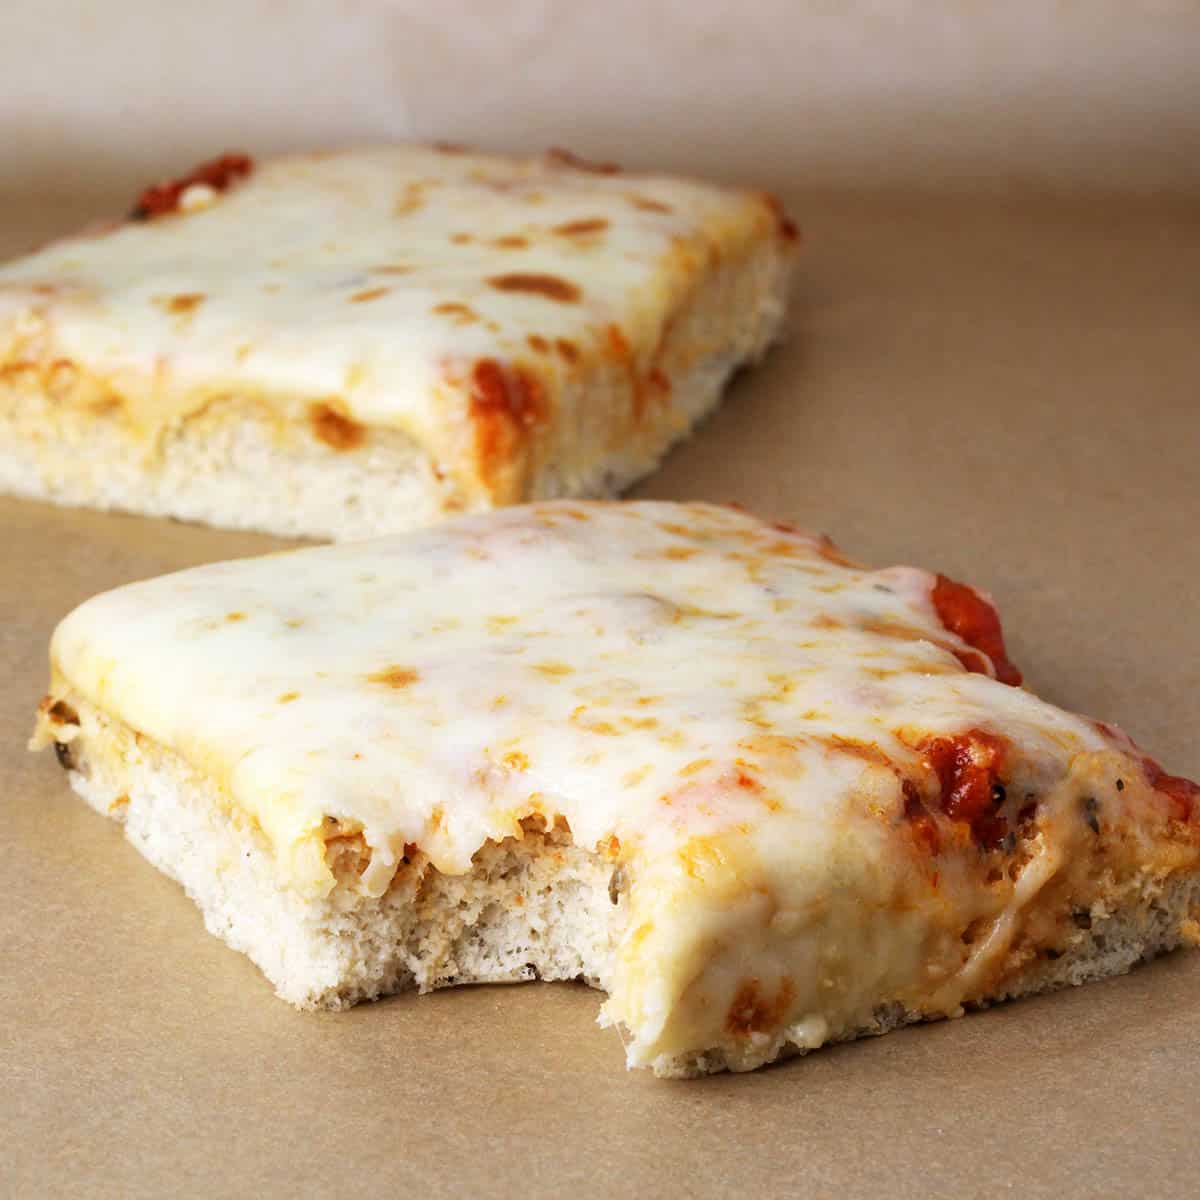 two slices of sicilian (square, thick crust) pizza on a sheet of unbleached parchment paper, a bite has been taken from the slice in the front